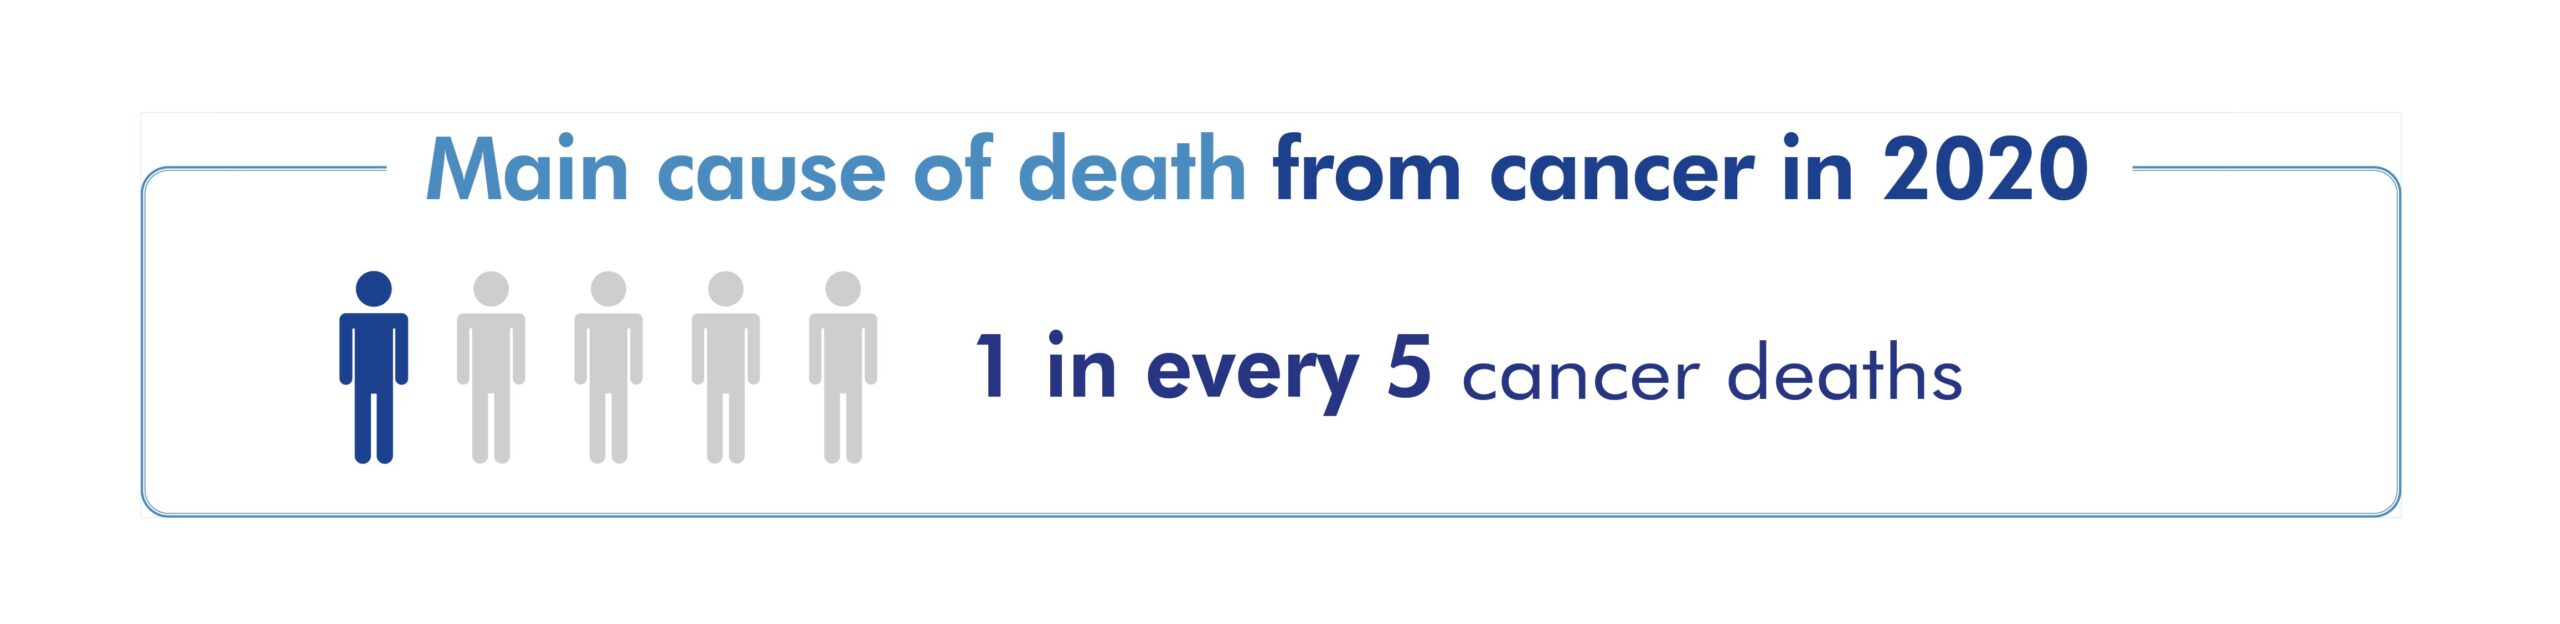 lung cancer main cause of death